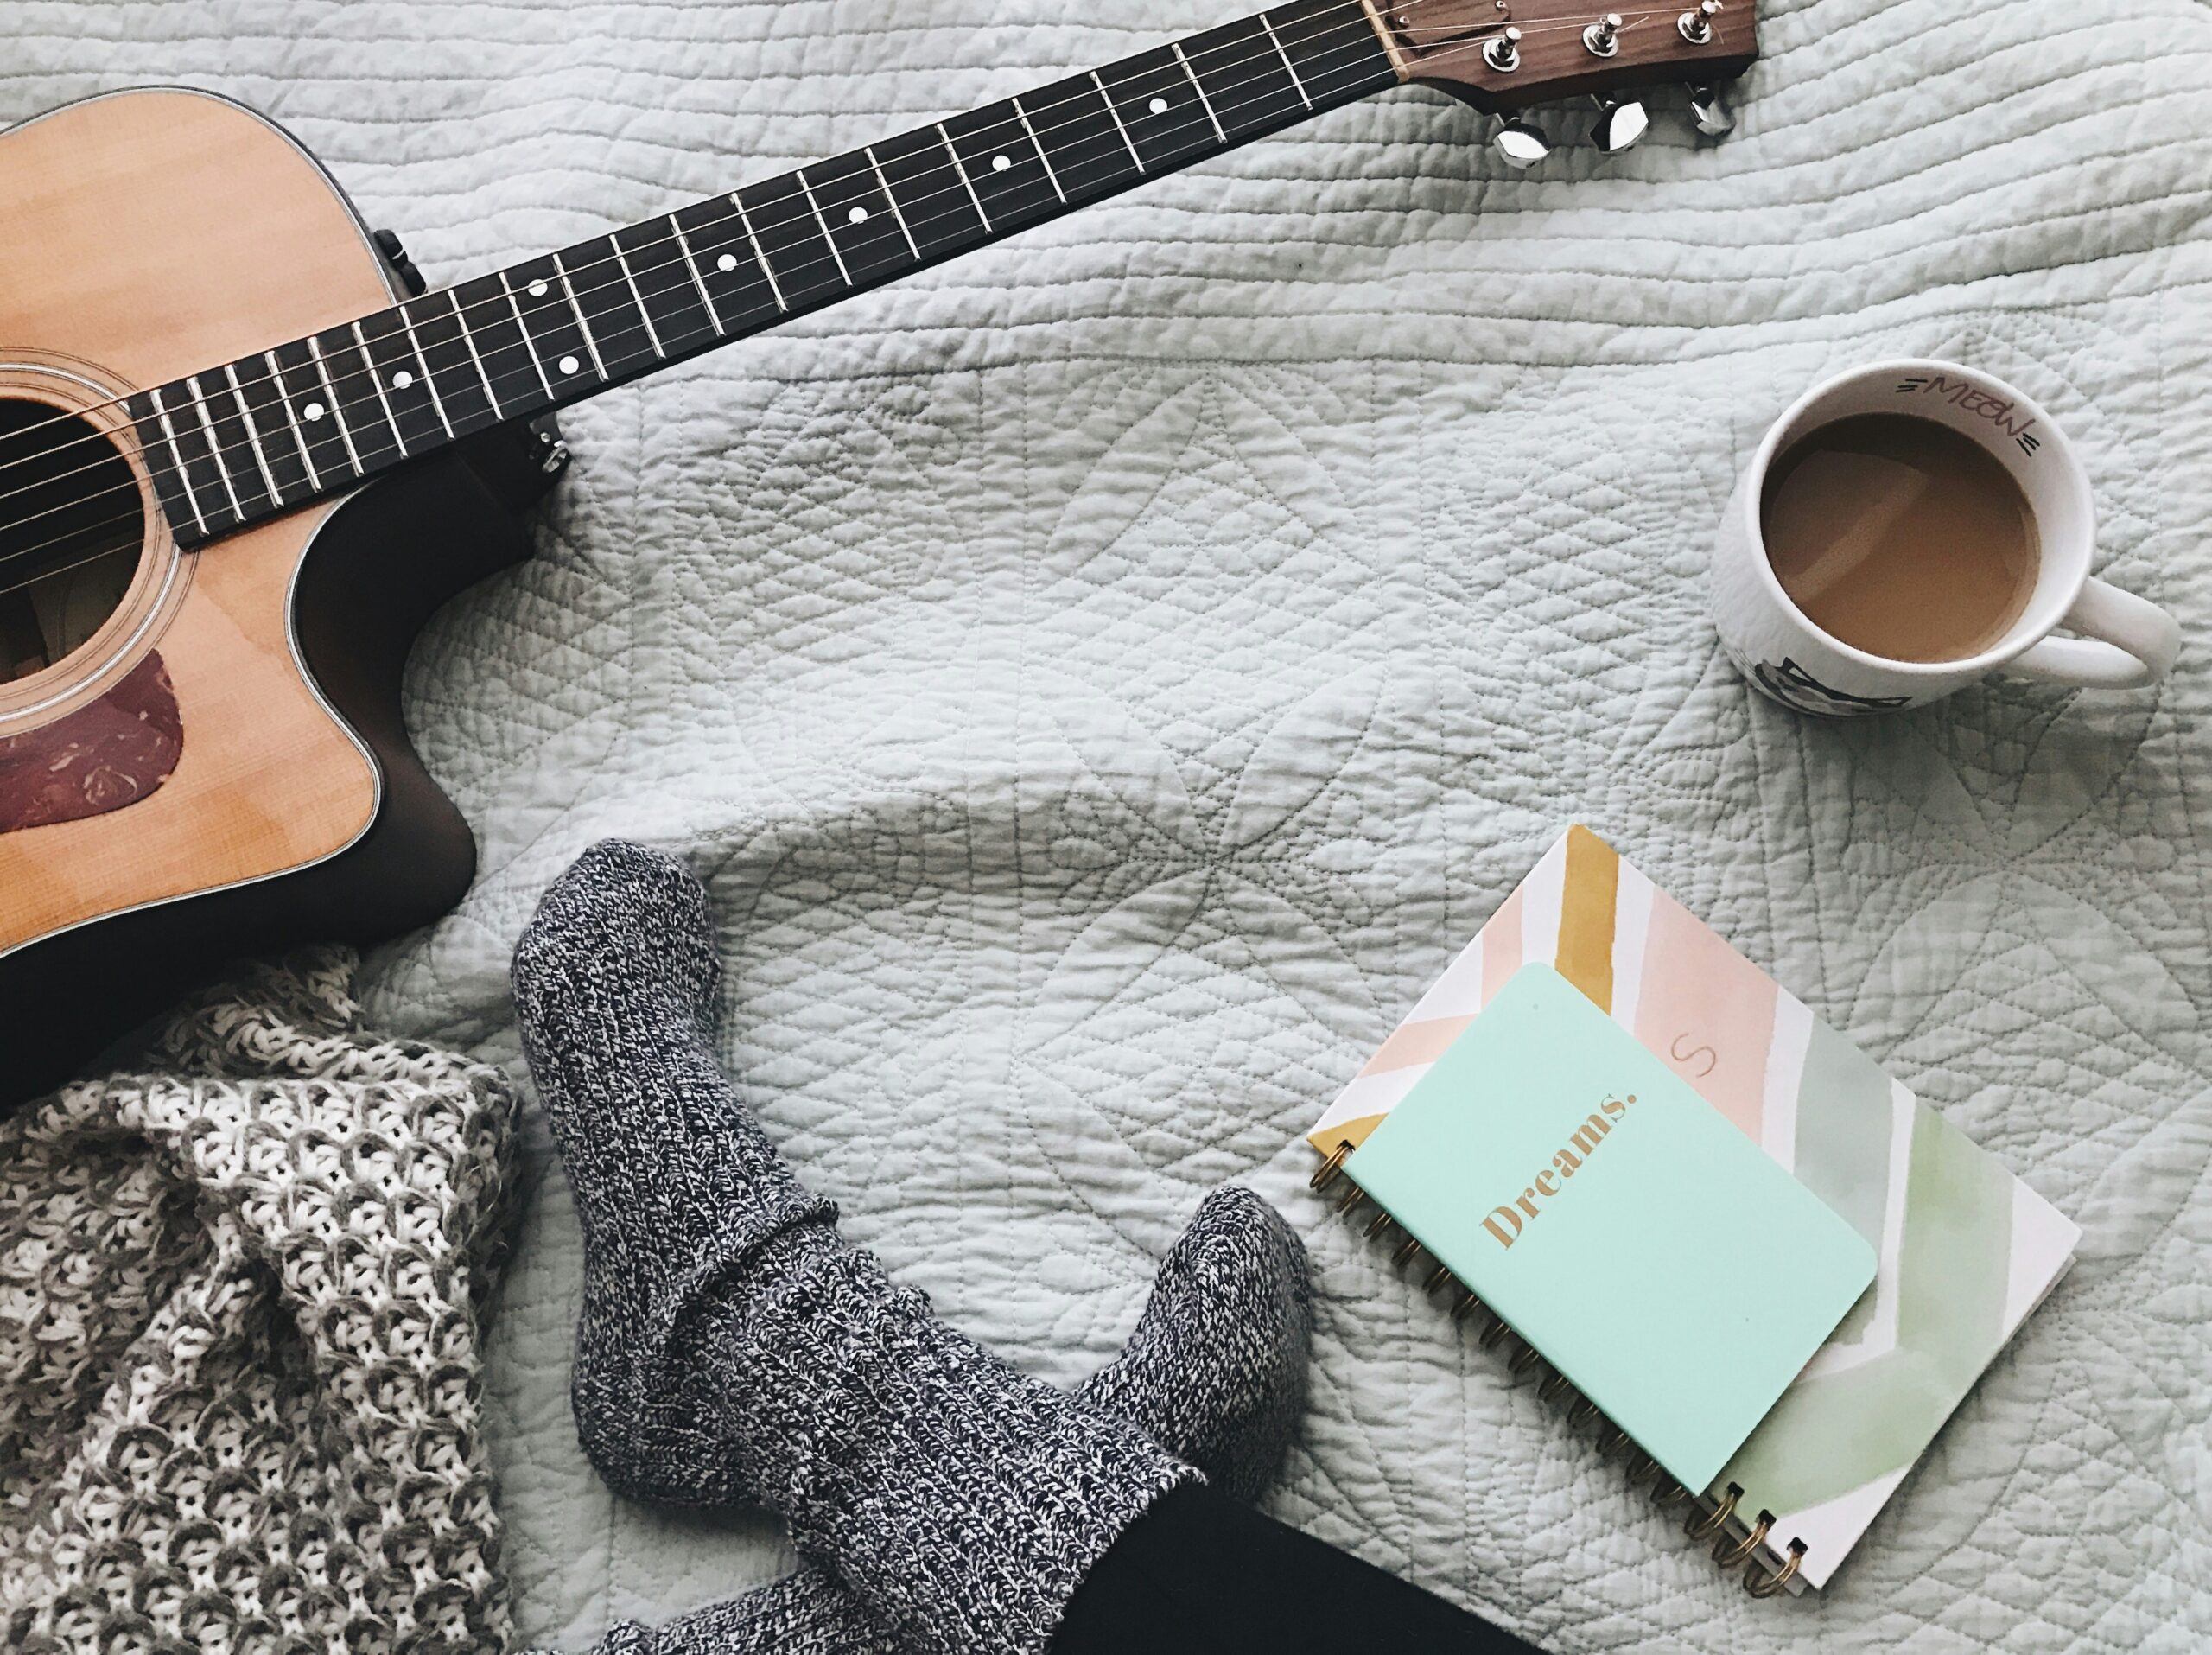 Here are a few ways to achieve the Tortured Poets Department aesthetic. Pictured: Someone sitting on a cozy bed with a guitar and journey